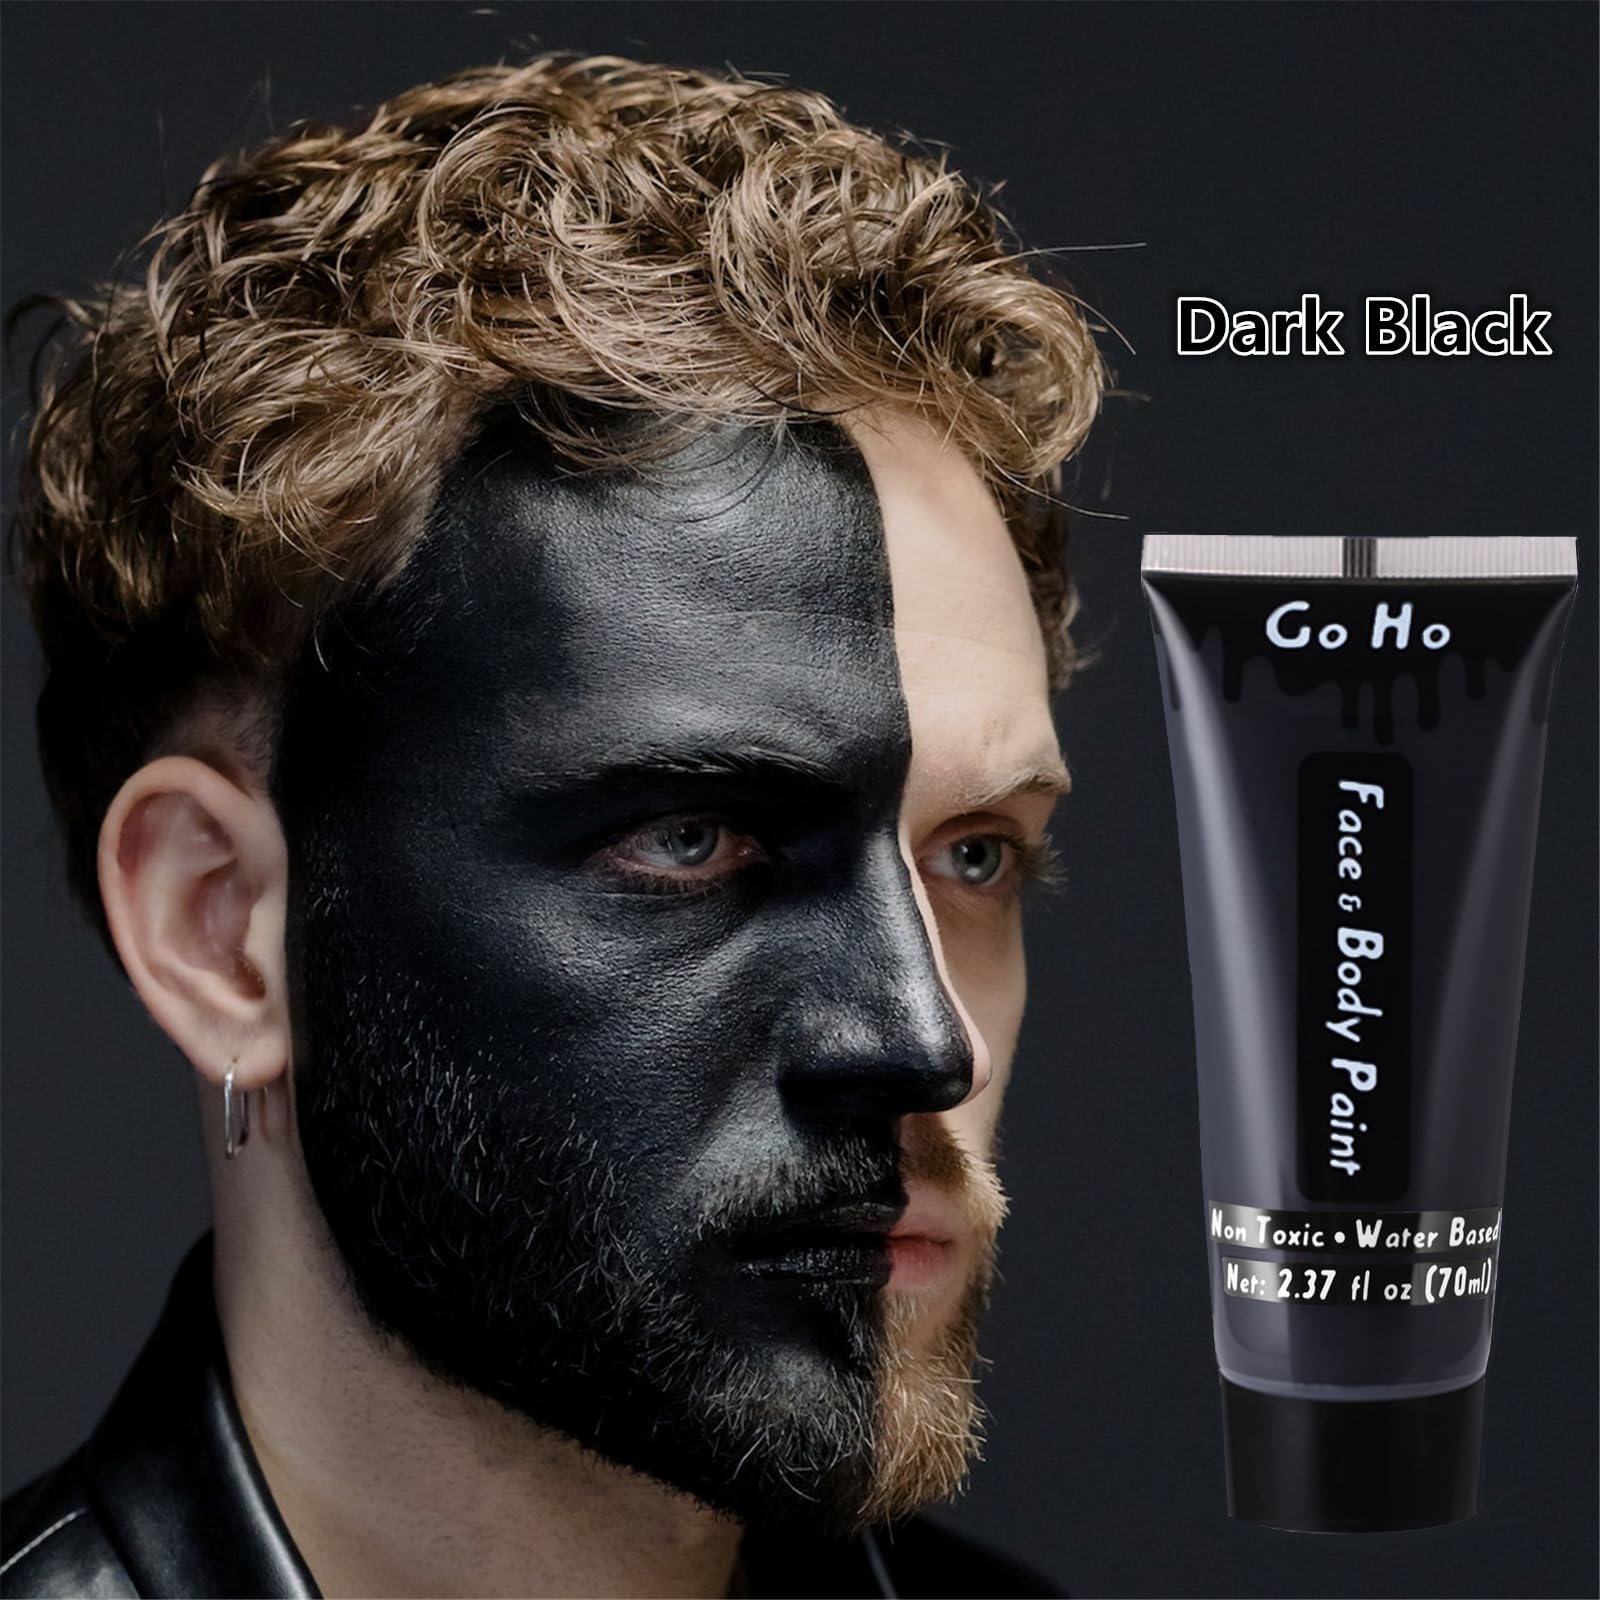 Go Ho Black Body Paint Washable(2.37 oz),Water Based Black Face Paint,Makeup Skull Skeleton Clown Black Face Body Paint for SFX Cosplay Costumes Festivals Halloween Make up